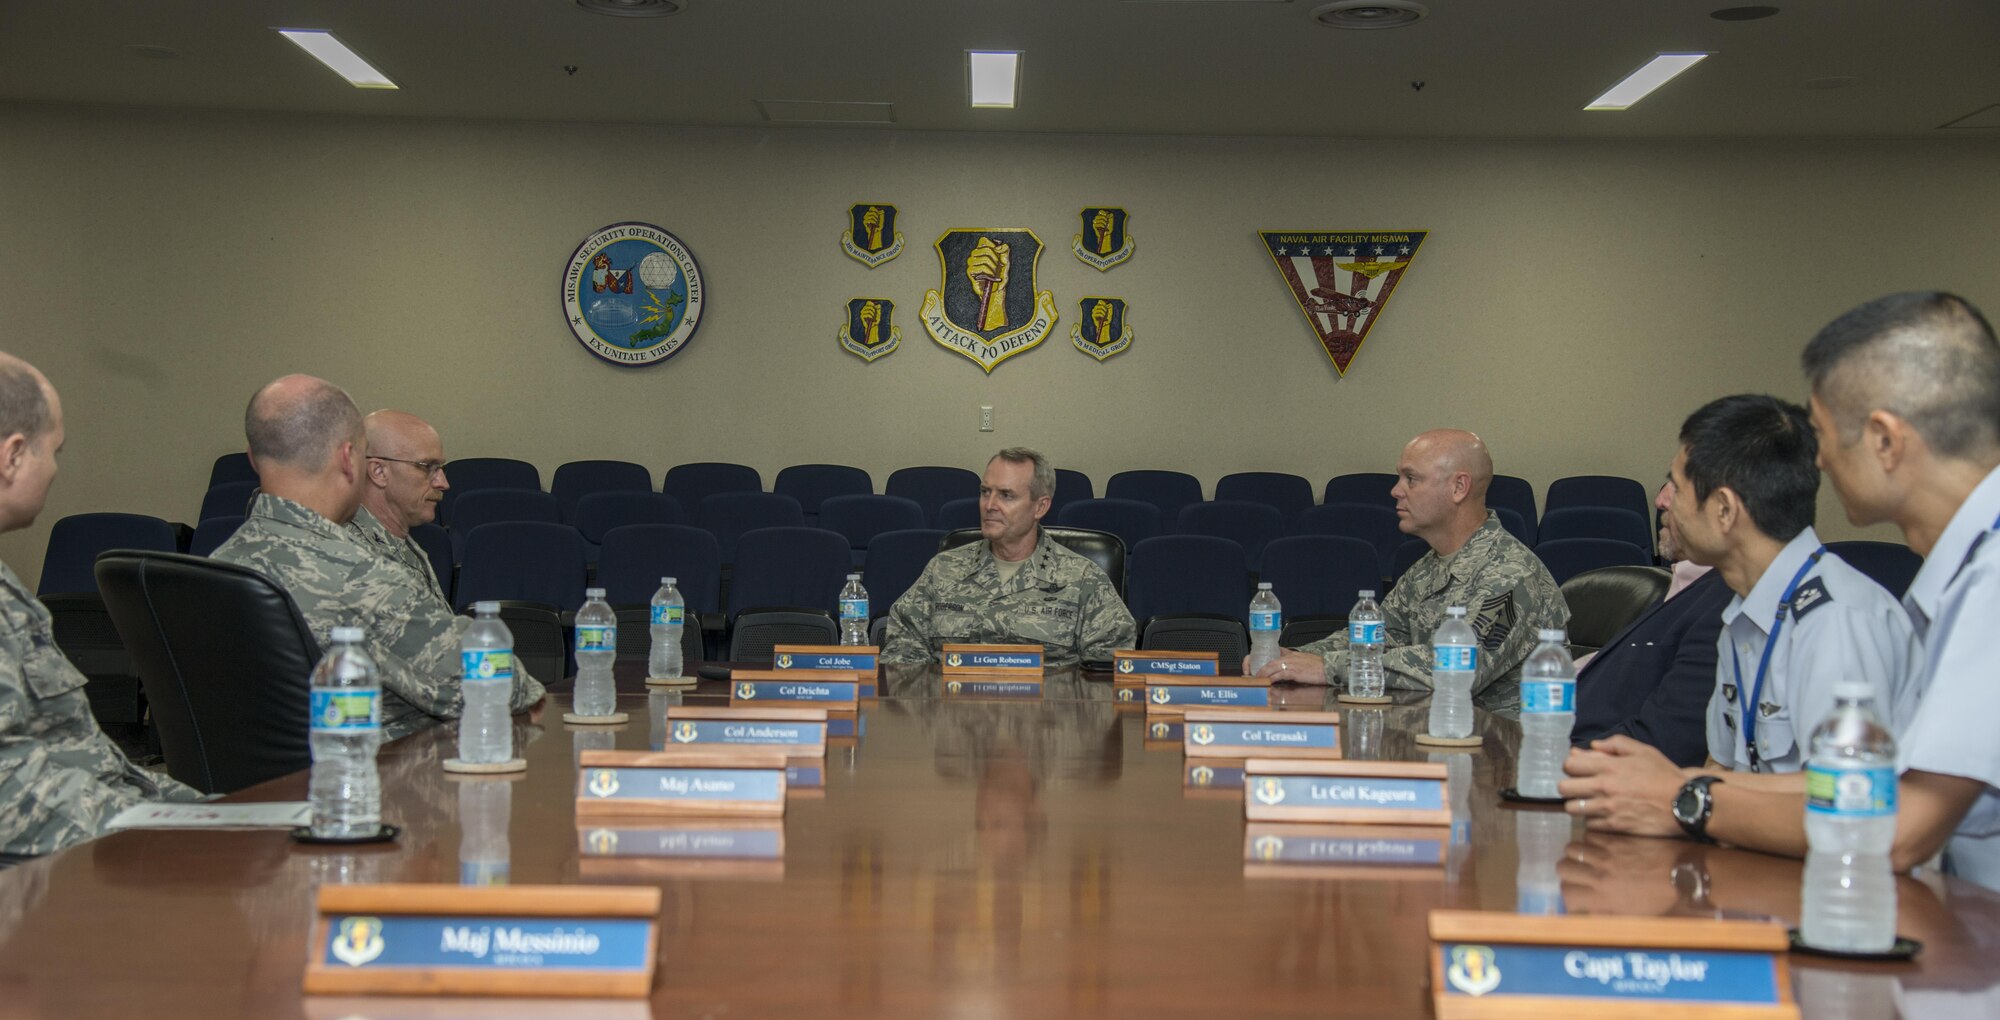 U.S. Air Force Lt. Gen. Darryl Roberson, commander, Air Education and Training Command, and AETC Command Chief Master Sgt. David Staton listen to a mission brief given by Col. R. Scott Jobe, 35th Fighter Wing commander, during their visit to Misawa Air Base, Japan, July 11, 2017. During the visit, the senior leaders were able to take a closer look at training to ensure continued support to 35th Fighter Wing maintainers. (U.S. Air Force photo by Senior Airman Brittany A. Chase)